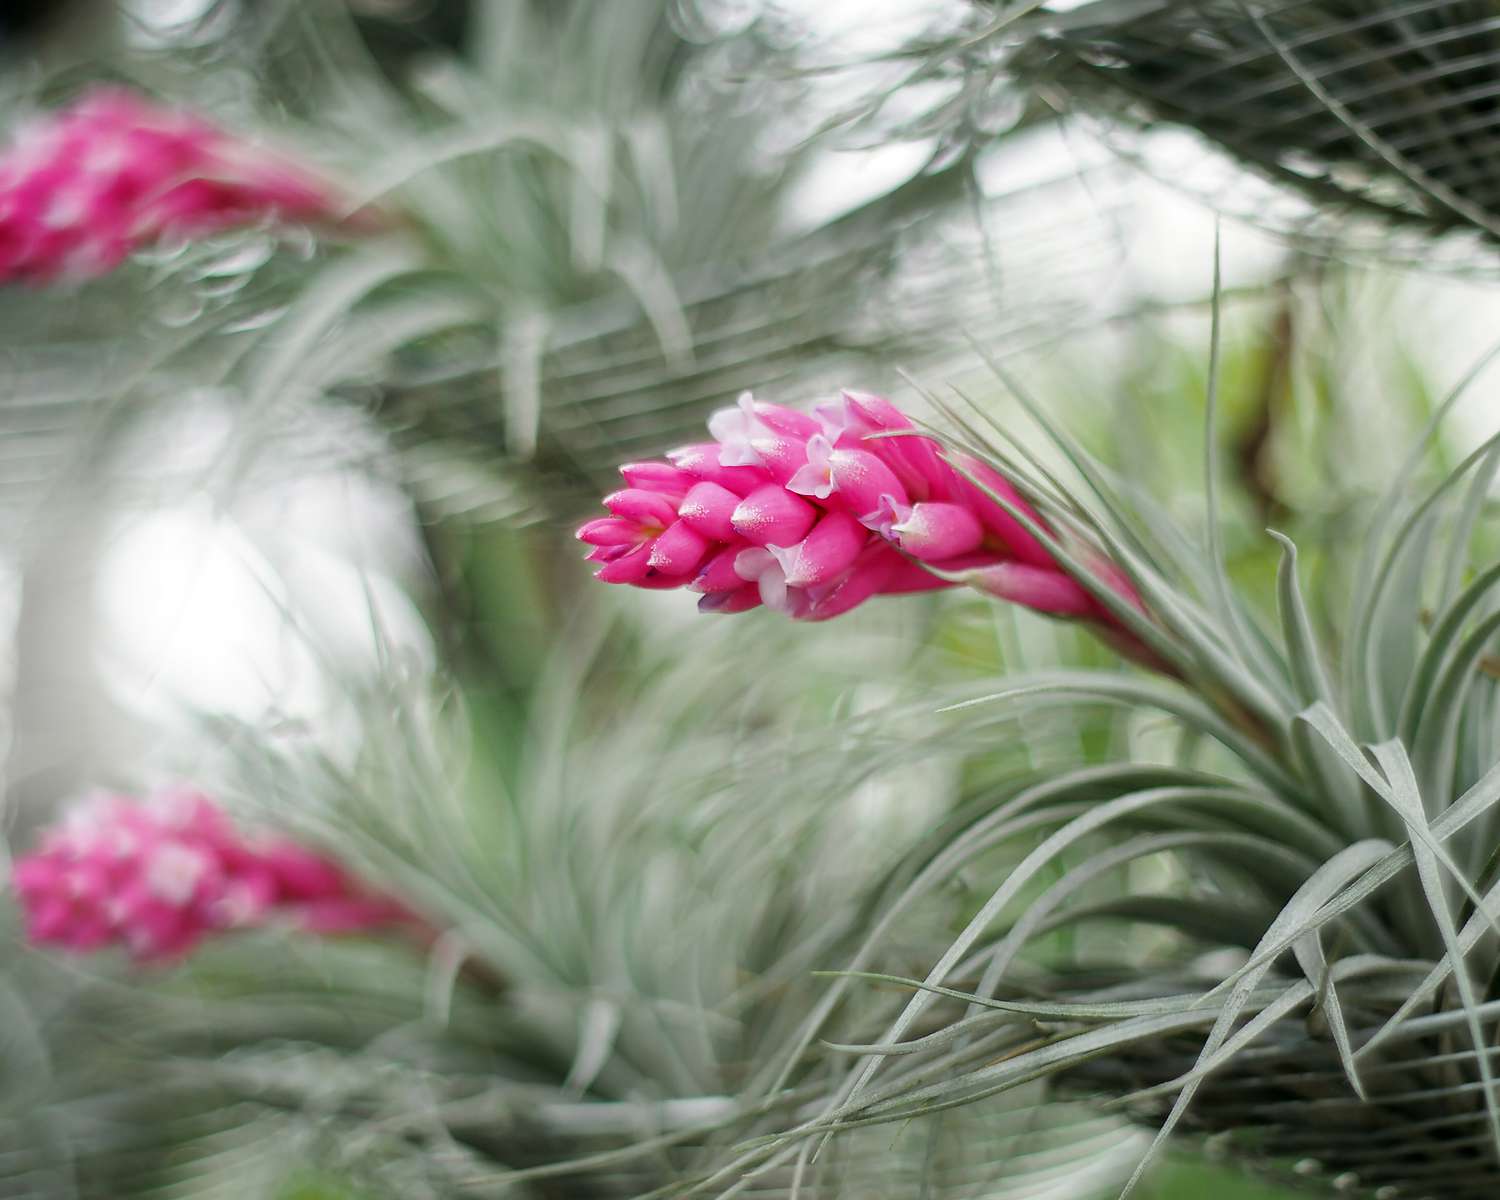 'Cotton Candy' air plant with silvery green leaves and bright pink blooms